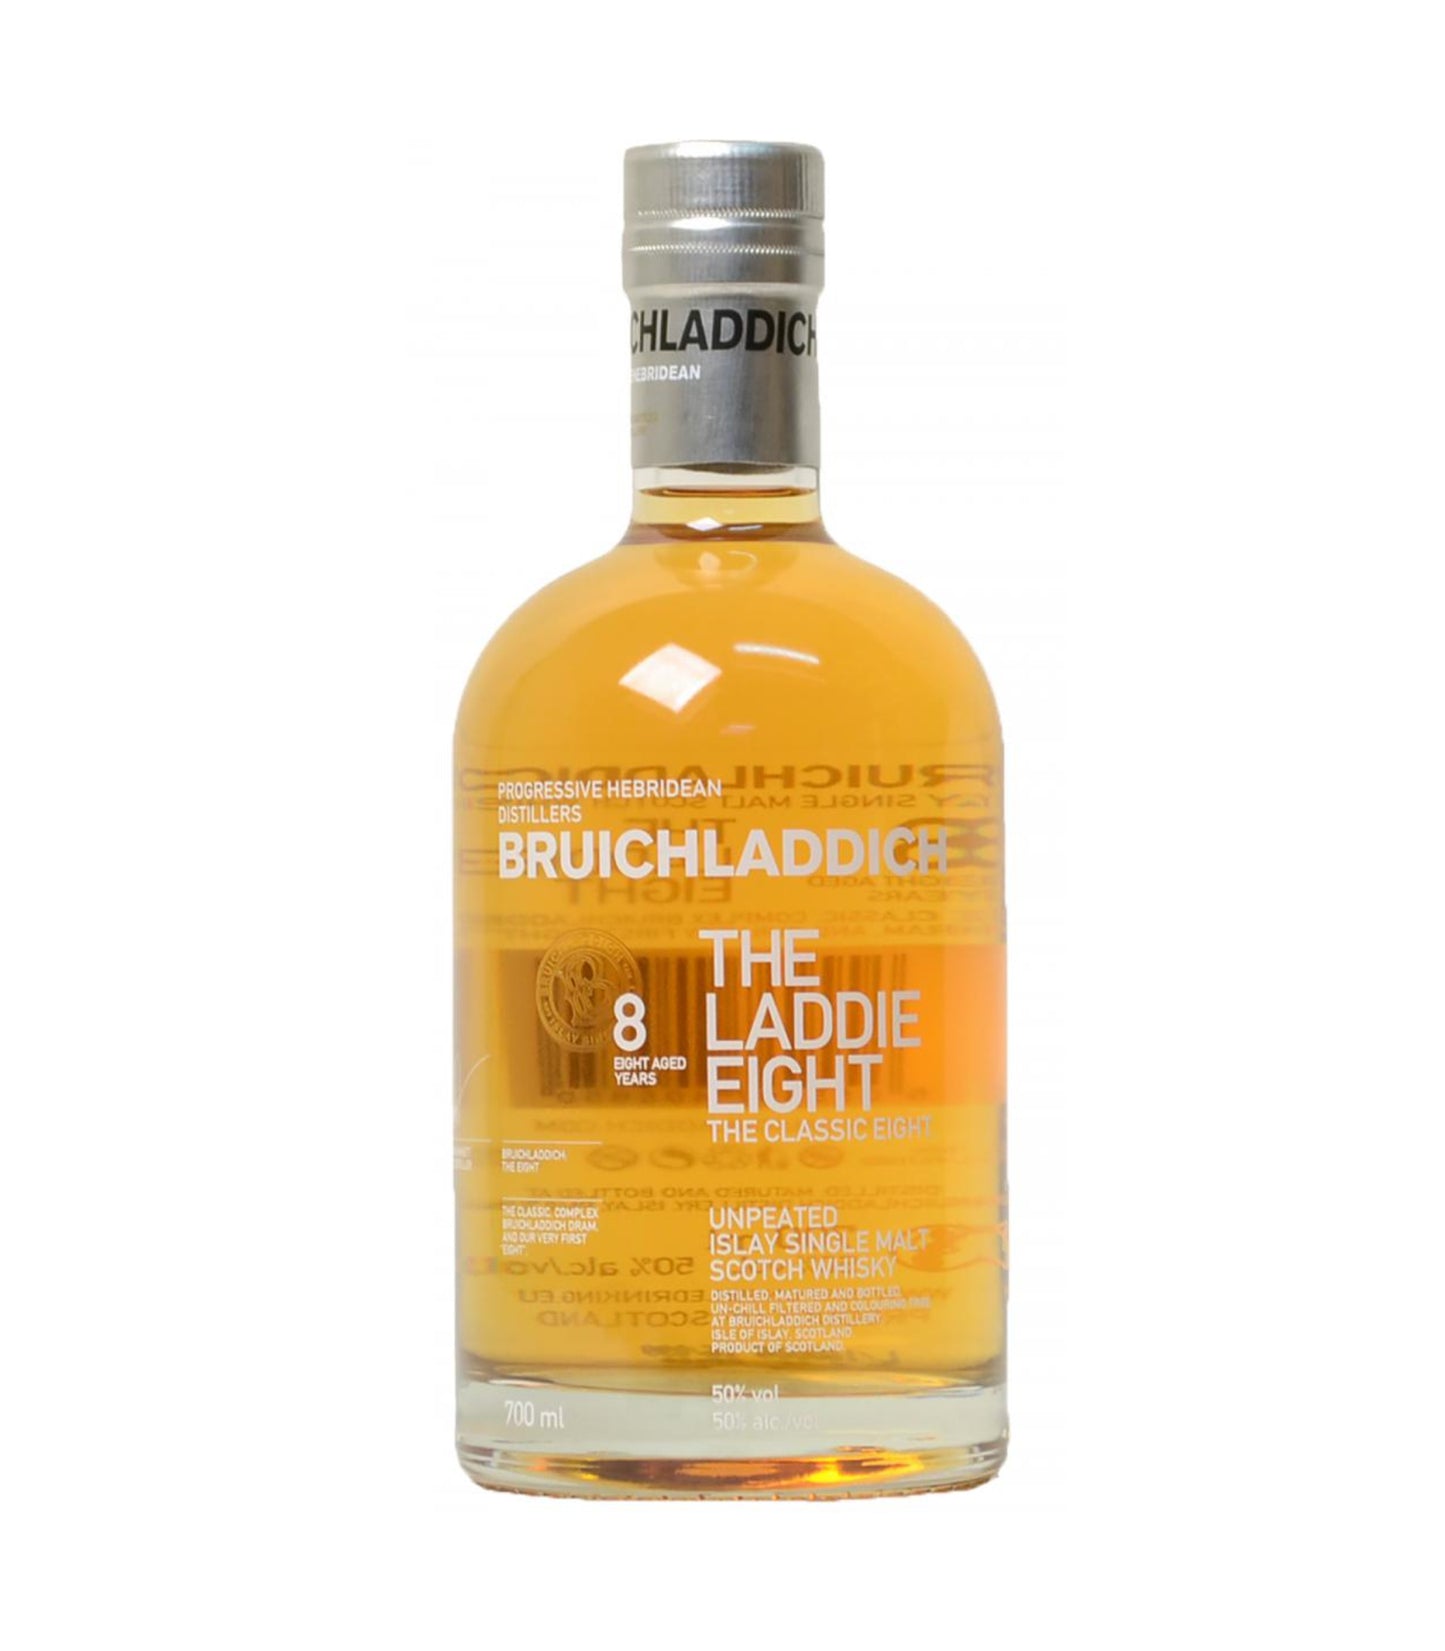 Bruichladdich 8 Year Old - The Laddie Eight Whisky (70cl, 50%)